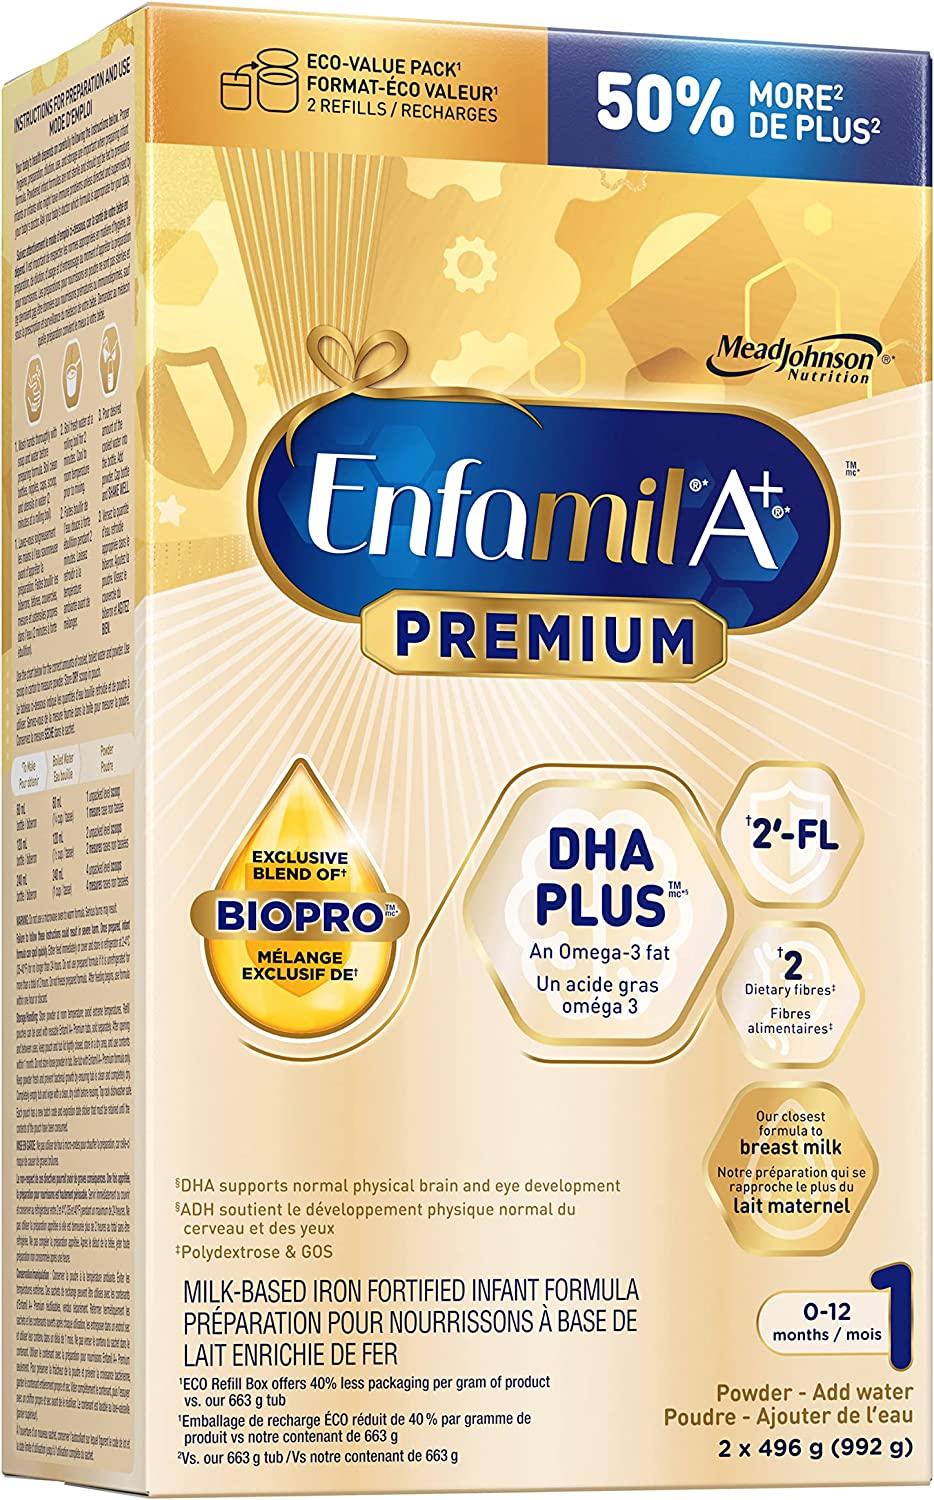 Enfamil A+ Premium, Baby Formula, with DHA and our exclusive BIOPRO blend™ with 2-FL, 992g